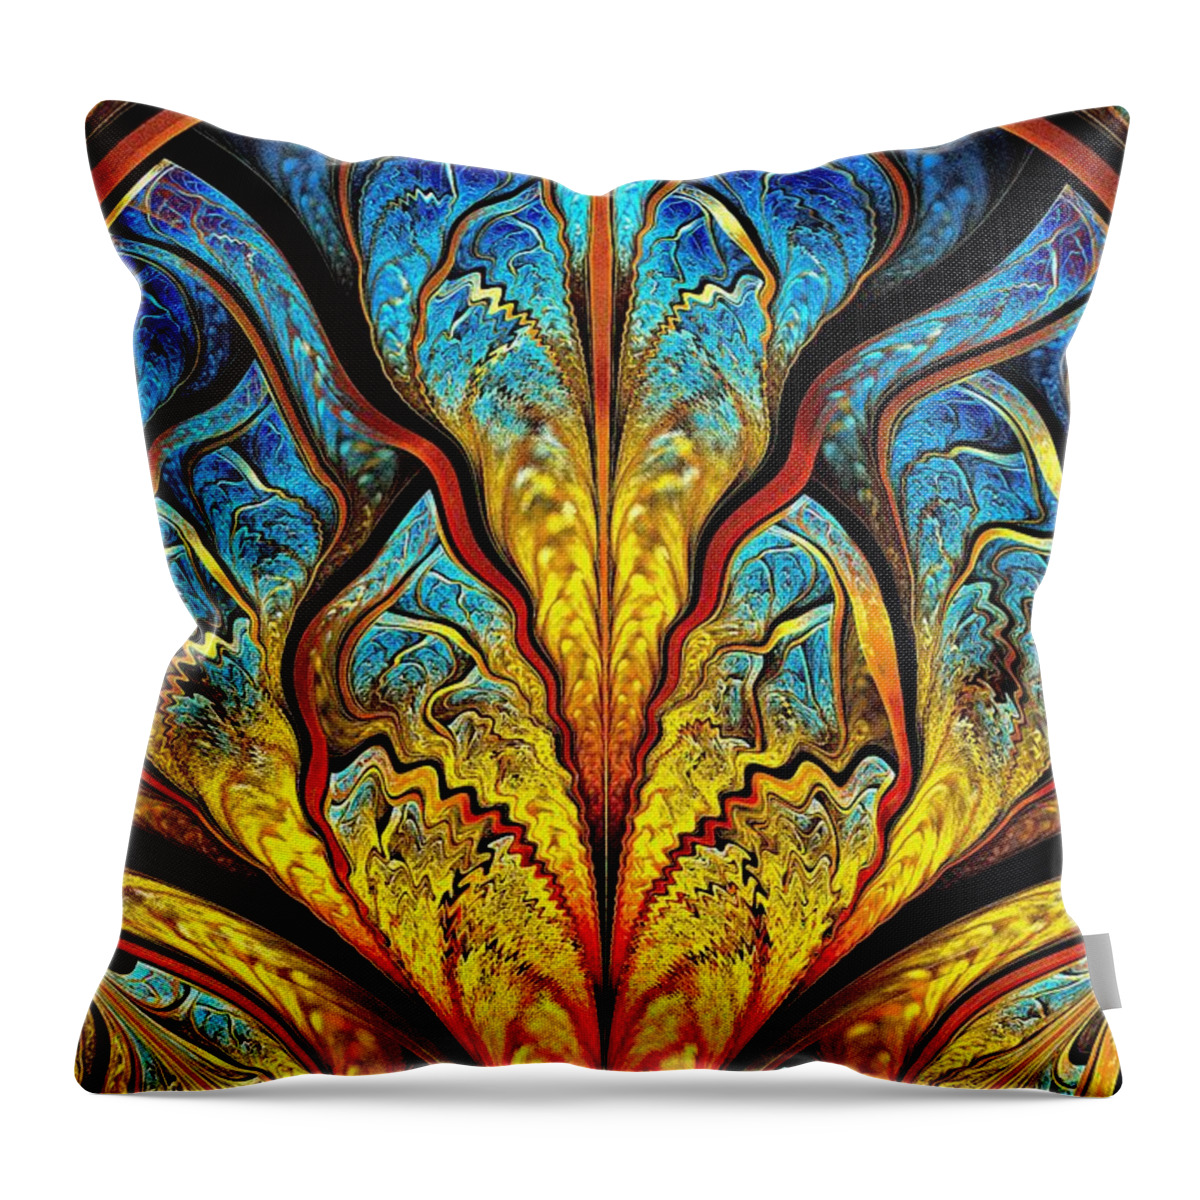 Expression Throw Pillow featuring the digital art Stained Glass Expression by Anastasiya Malakhova